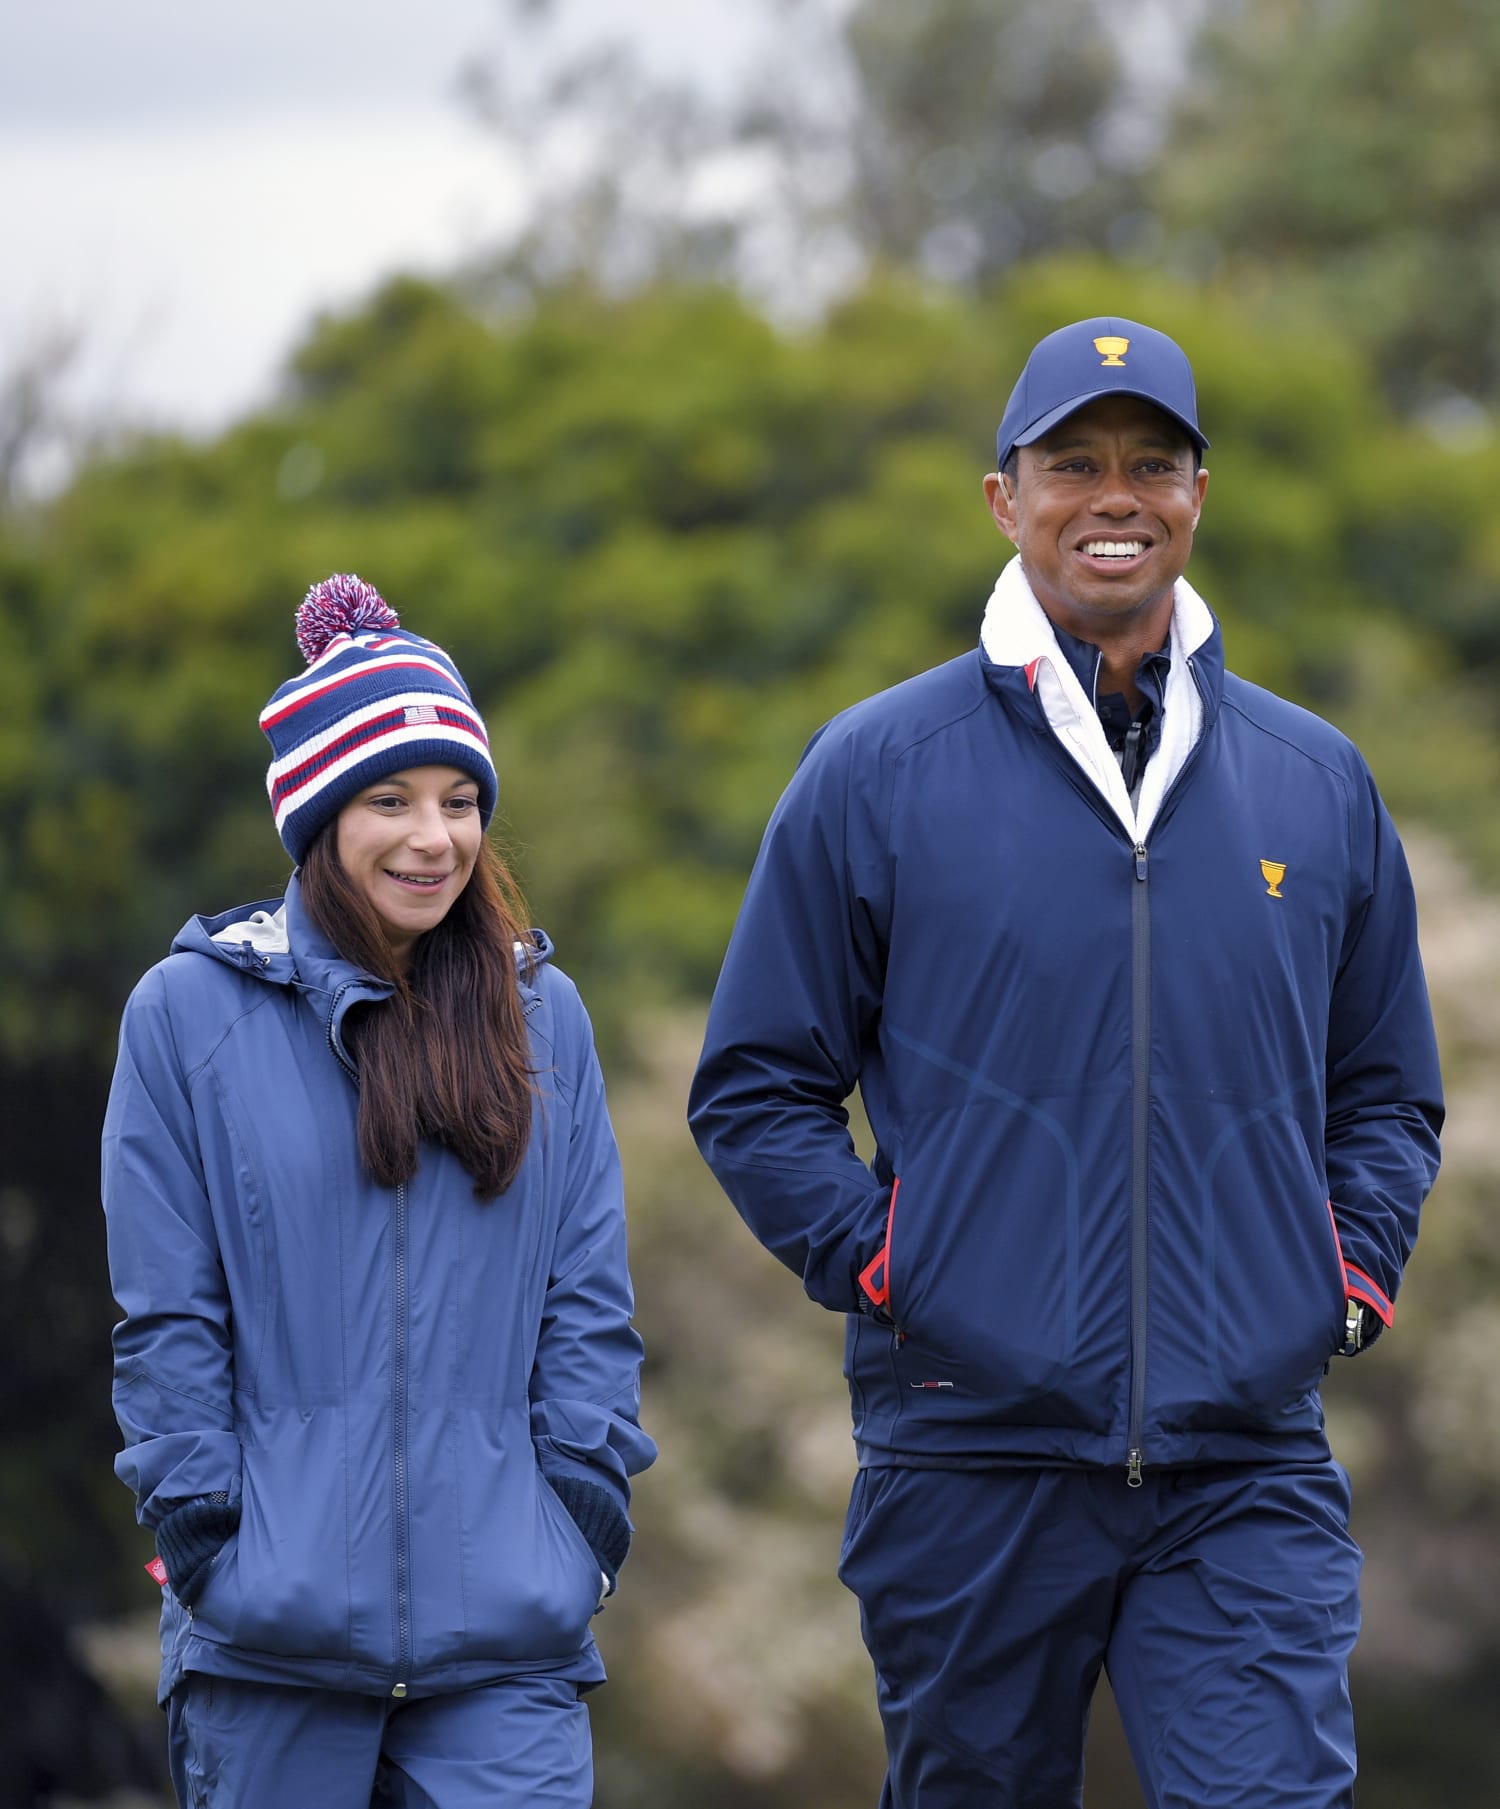 Tiger Woods former girlfriend wants NDA nullified, citing sexual assault